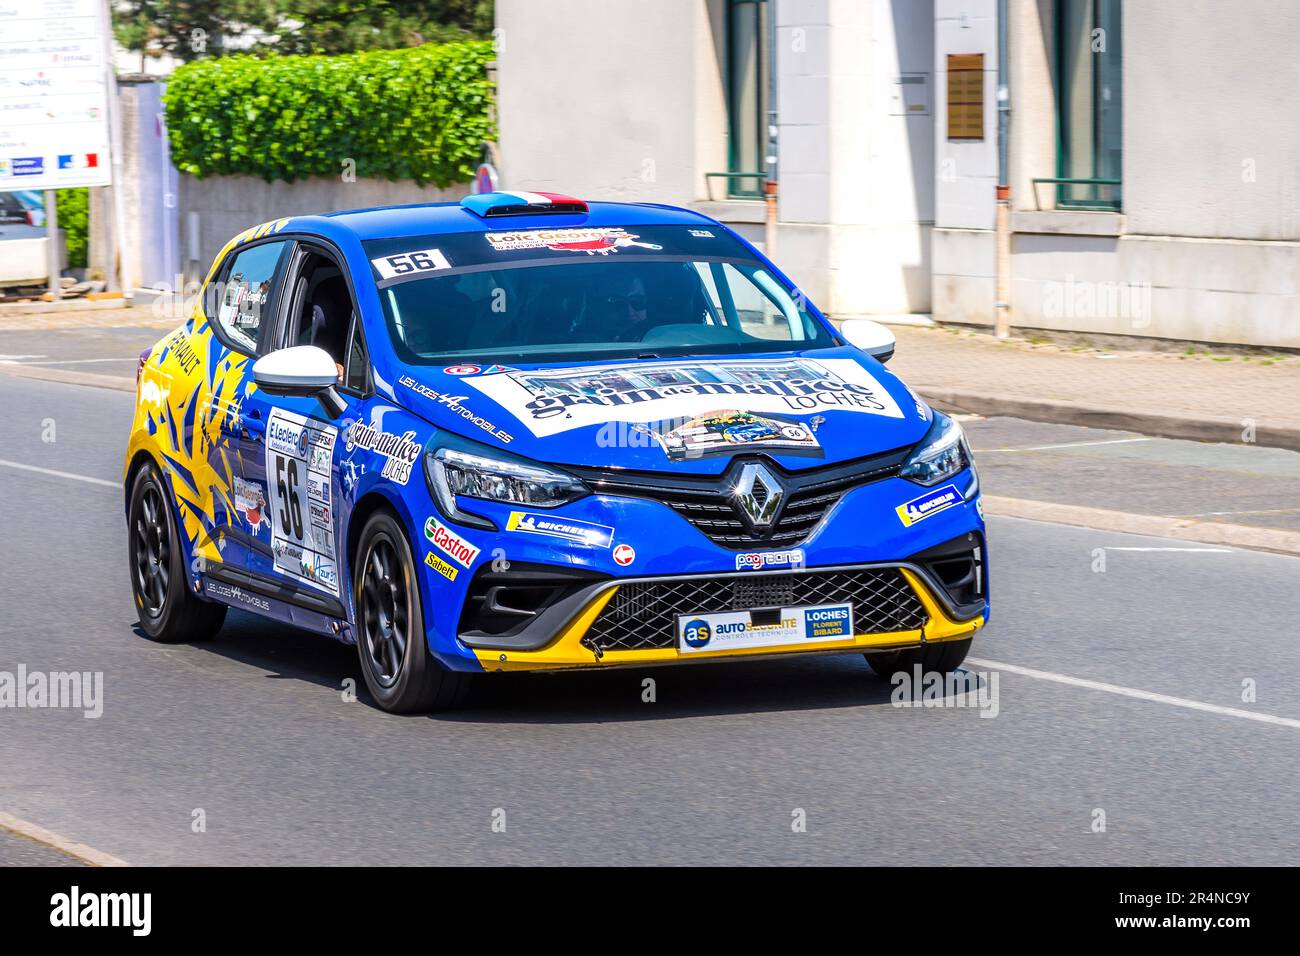 Renault rally car driving through Loches, Indre-et-Loire (37), France. Stock Photo